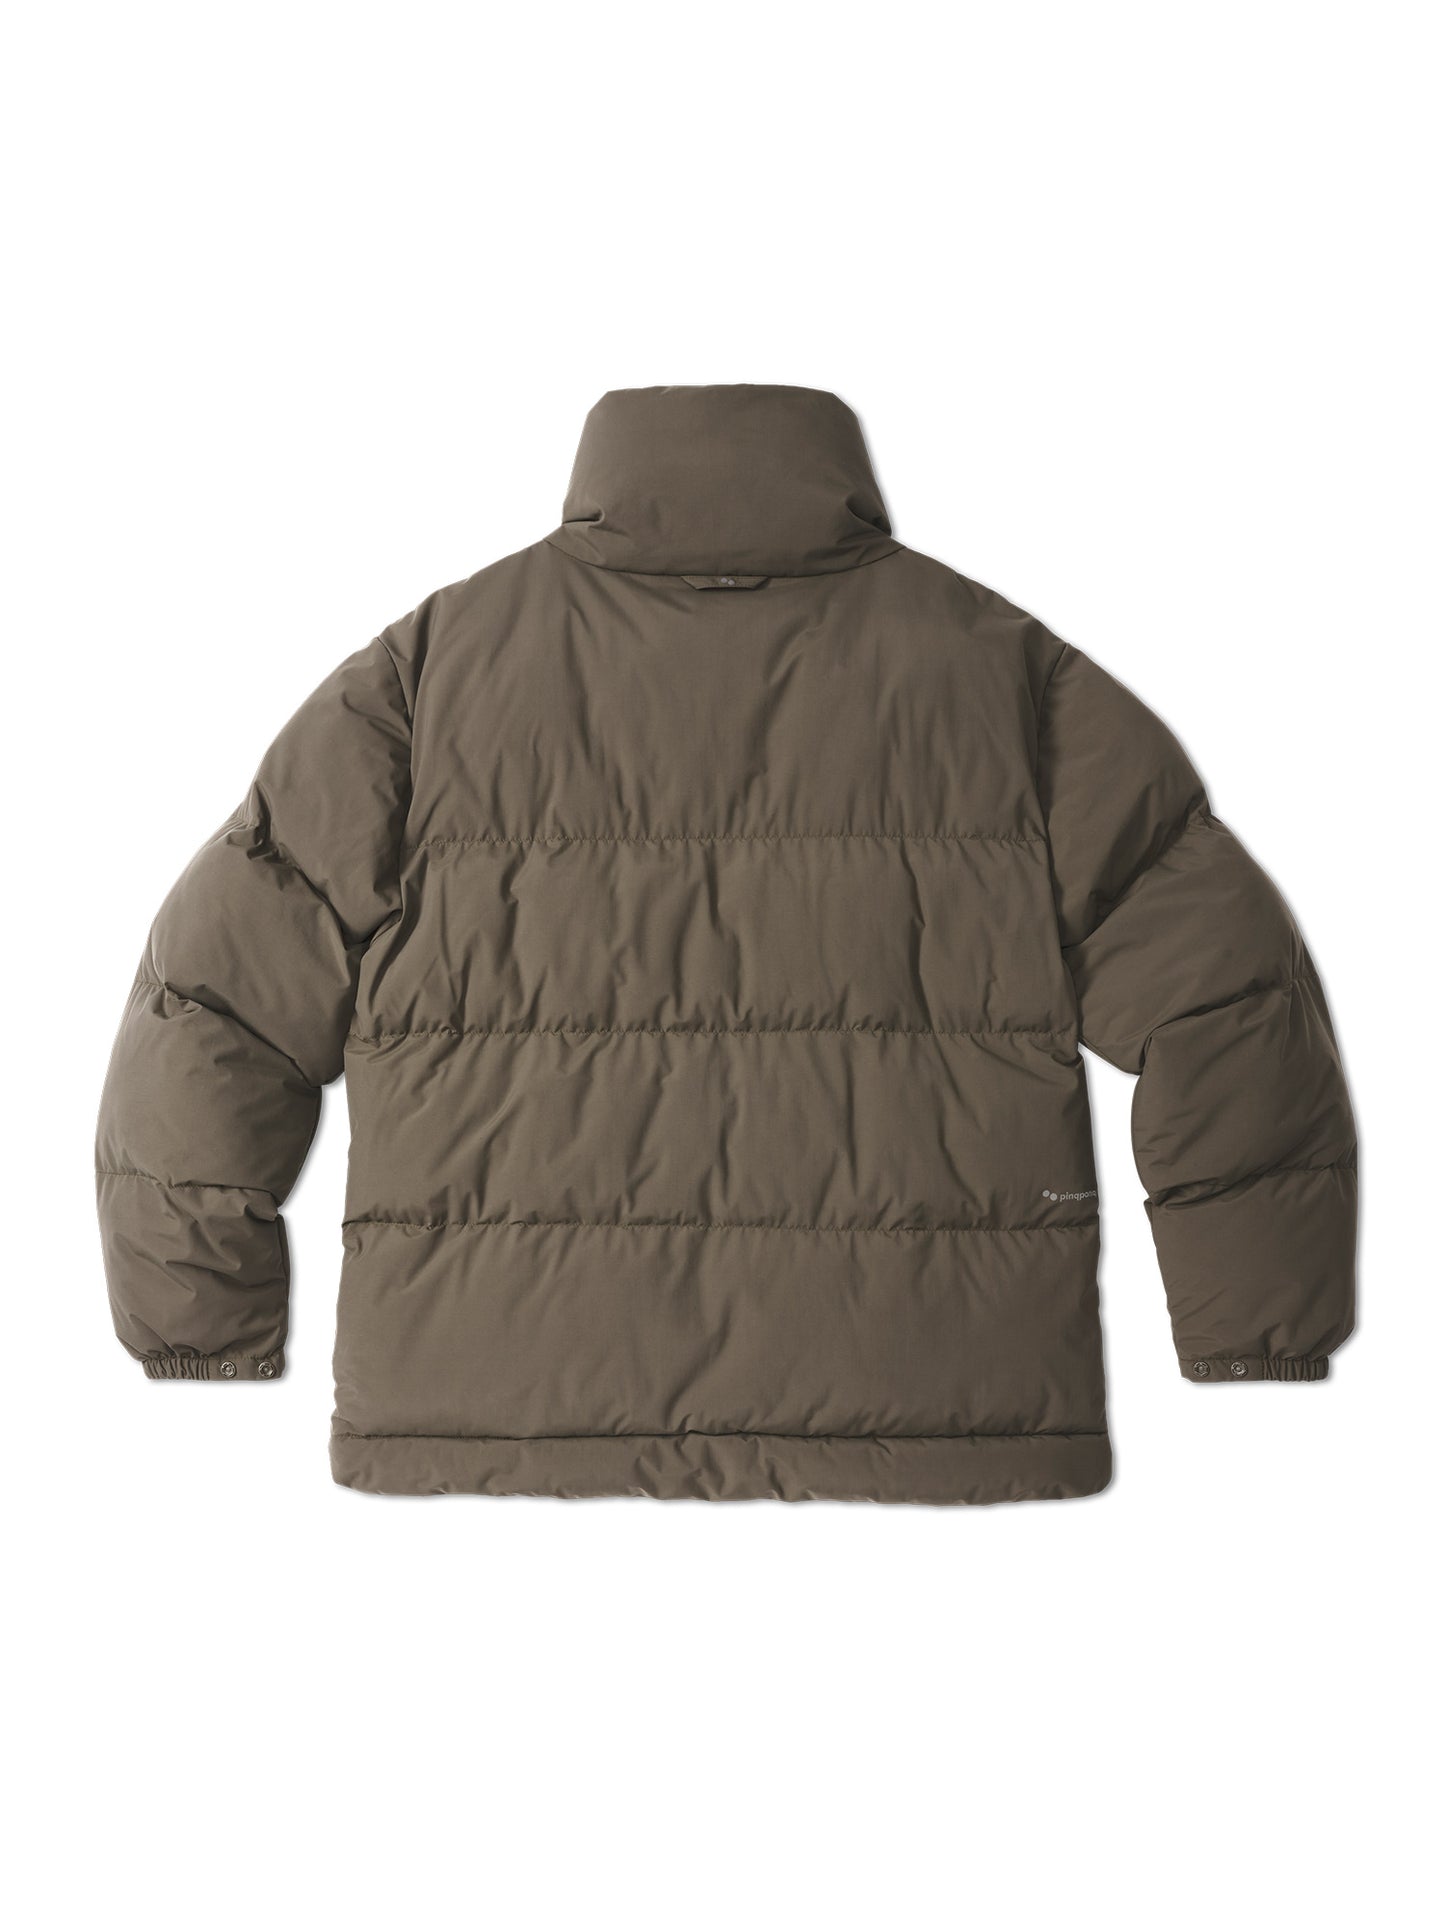 pinqponq-Puffer-Jacket-Unisex-Coffee-Brown-back